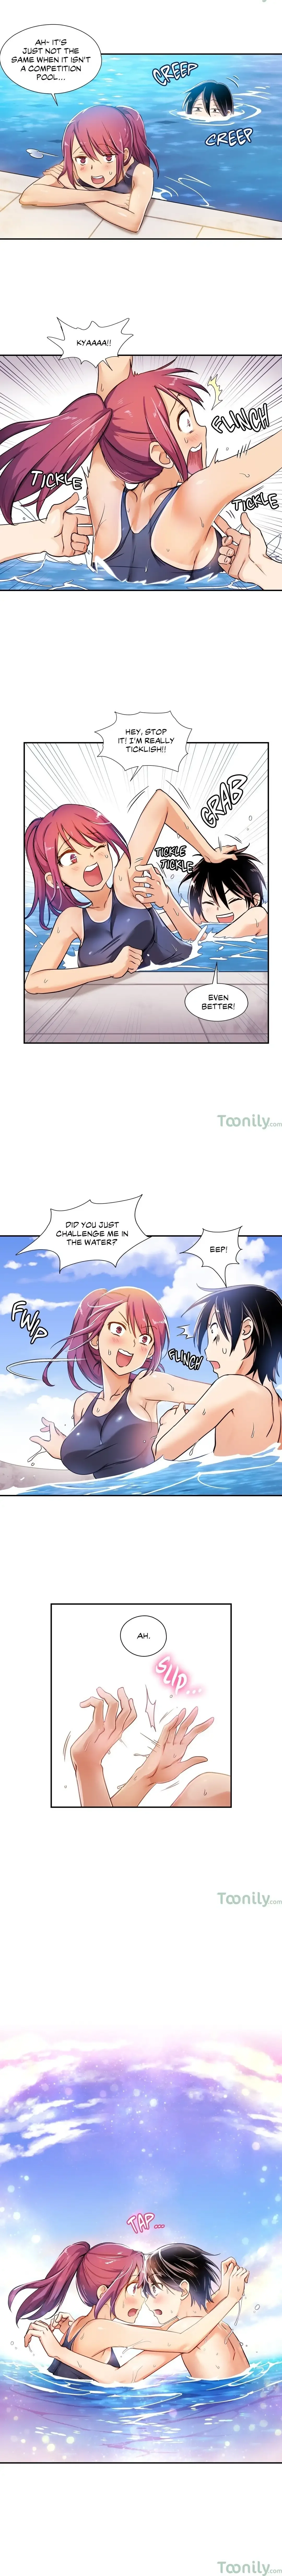 under-observation-my-first-loves-and-i-chap-4-4